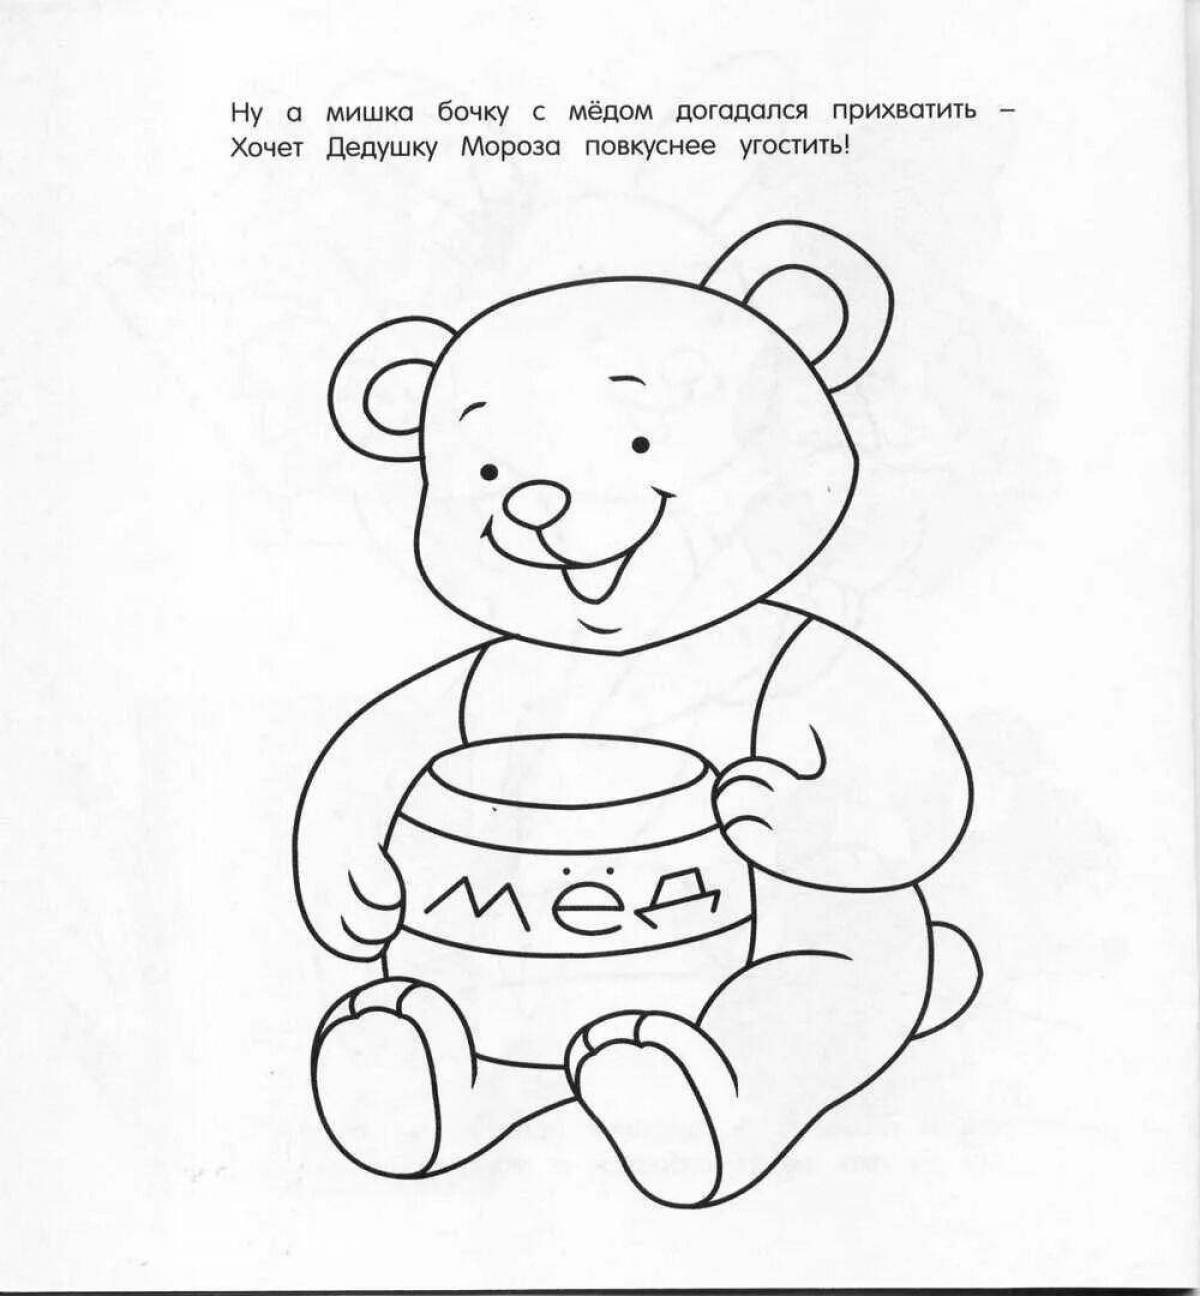 Cute bear with honey coloring book